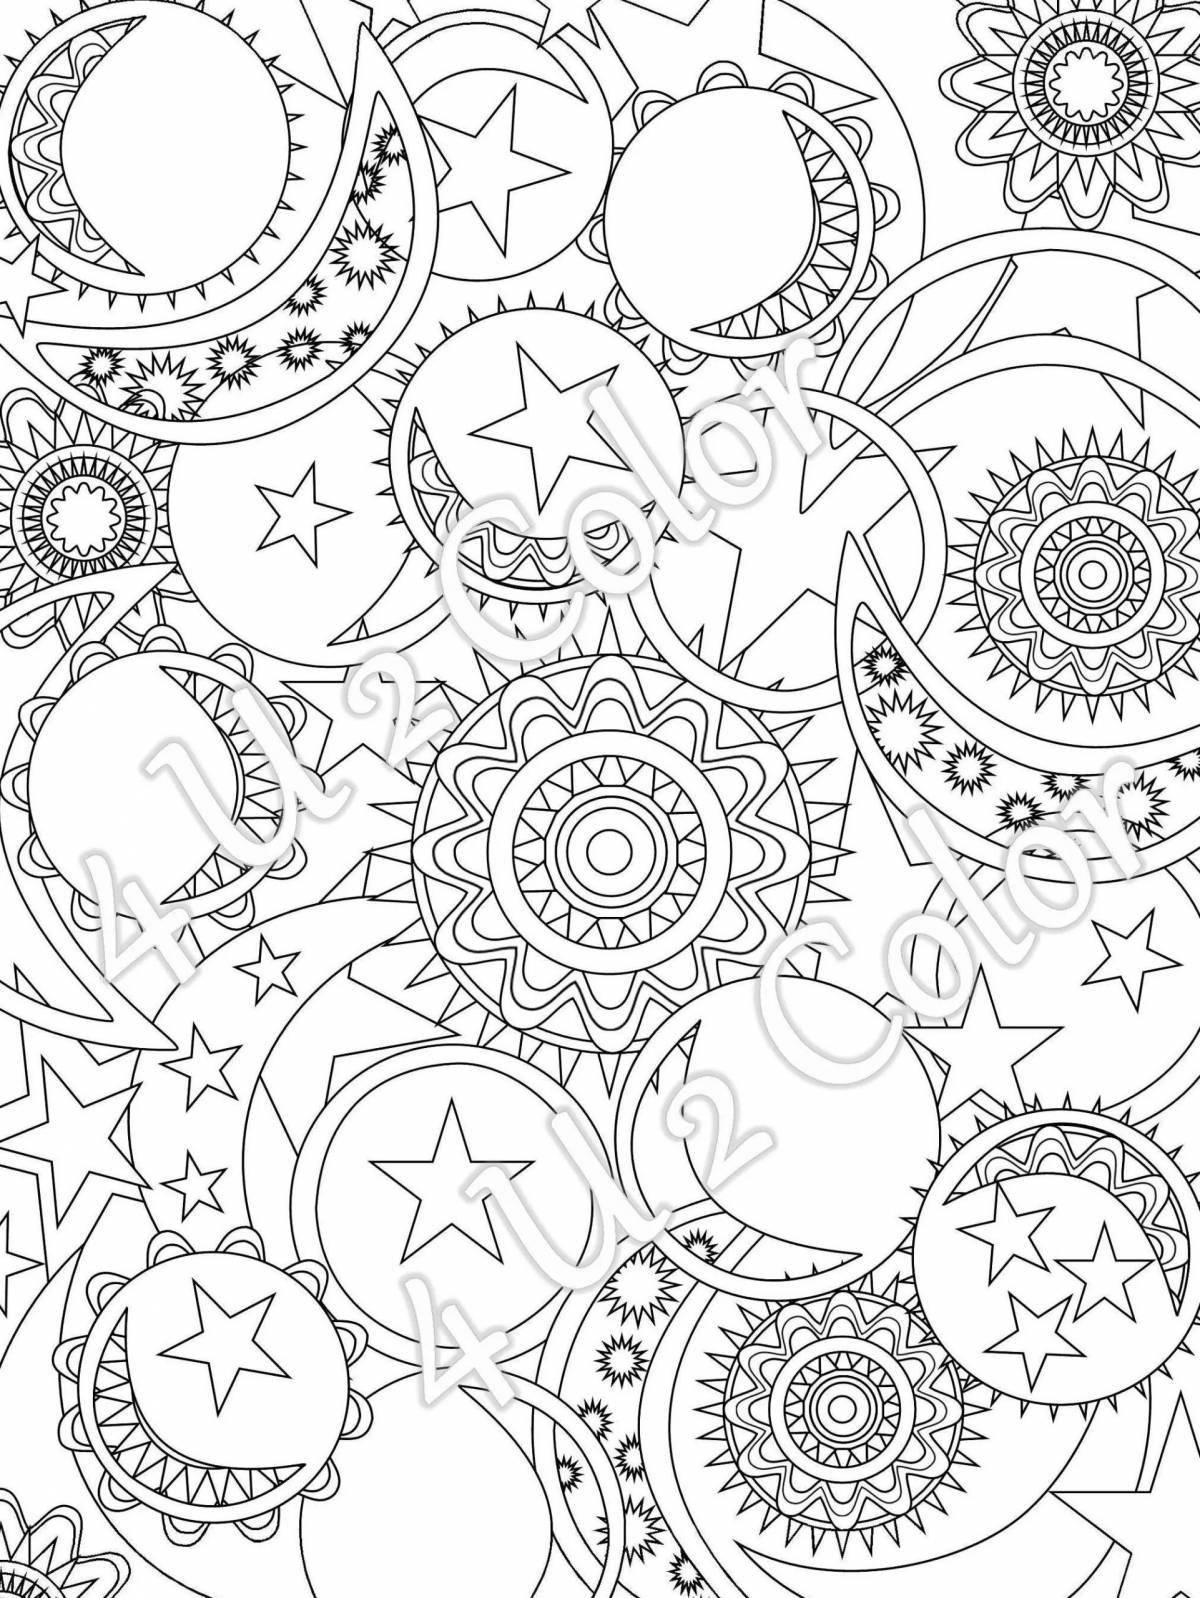 Inviting coloring anti-stress space